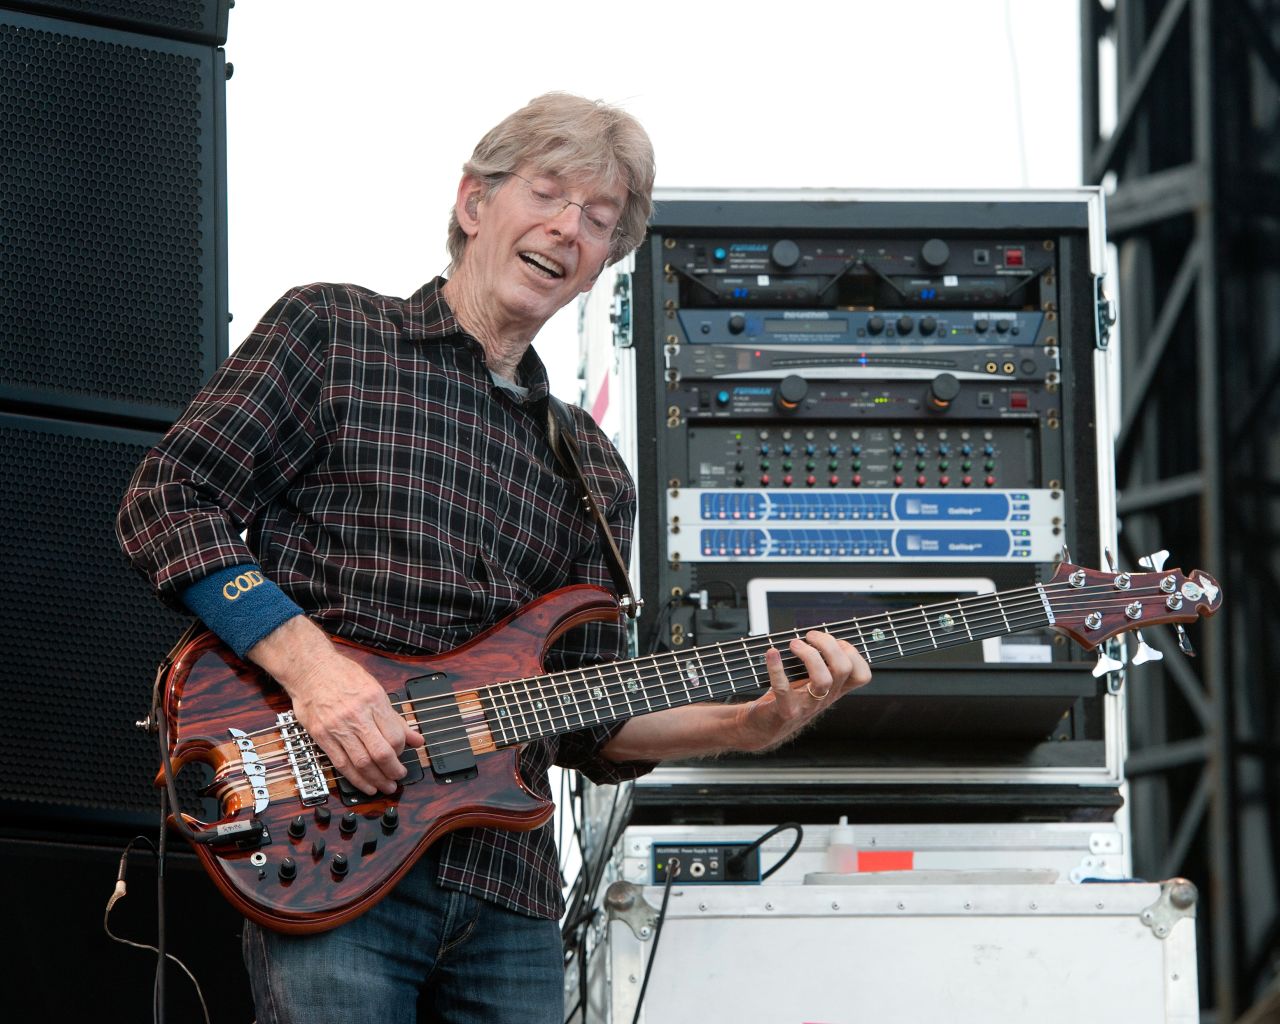 Grateful Dead bassist Phil Lesh took to <a href="https://www.facebook.com/TerrapinCrossroads/posts/905618469521331" target="_blank" target="_blank">Facebook to reveal</a> he was battling bladder cancer. In an apology to fans for canceling a pair of concerts, Lesh announced he's received treatment at the Mayo Clinic and his prognosis is good. 